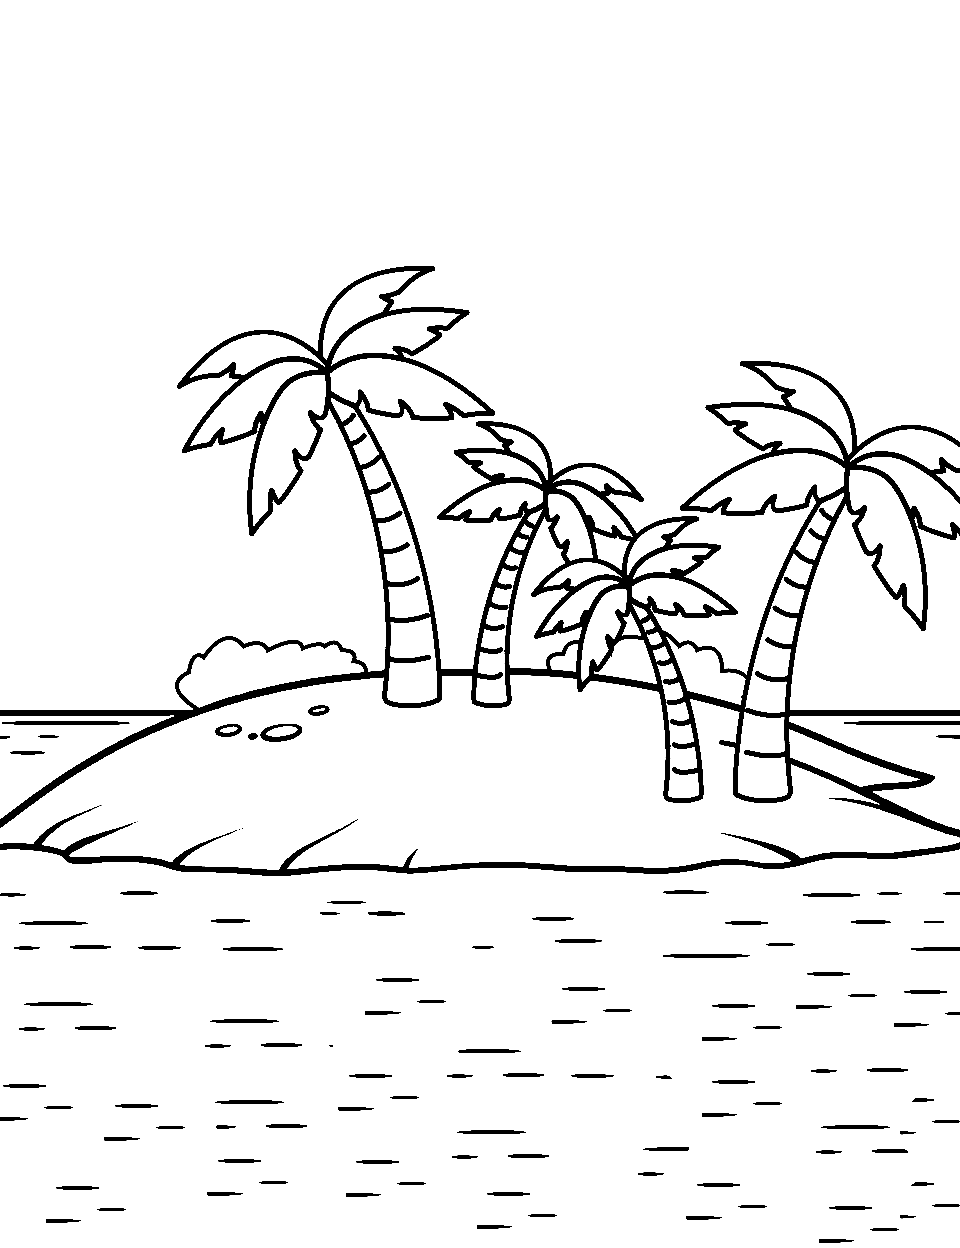 Island Paradise Ocean Coloring Page - A small tropical island with palm trees and a beach.